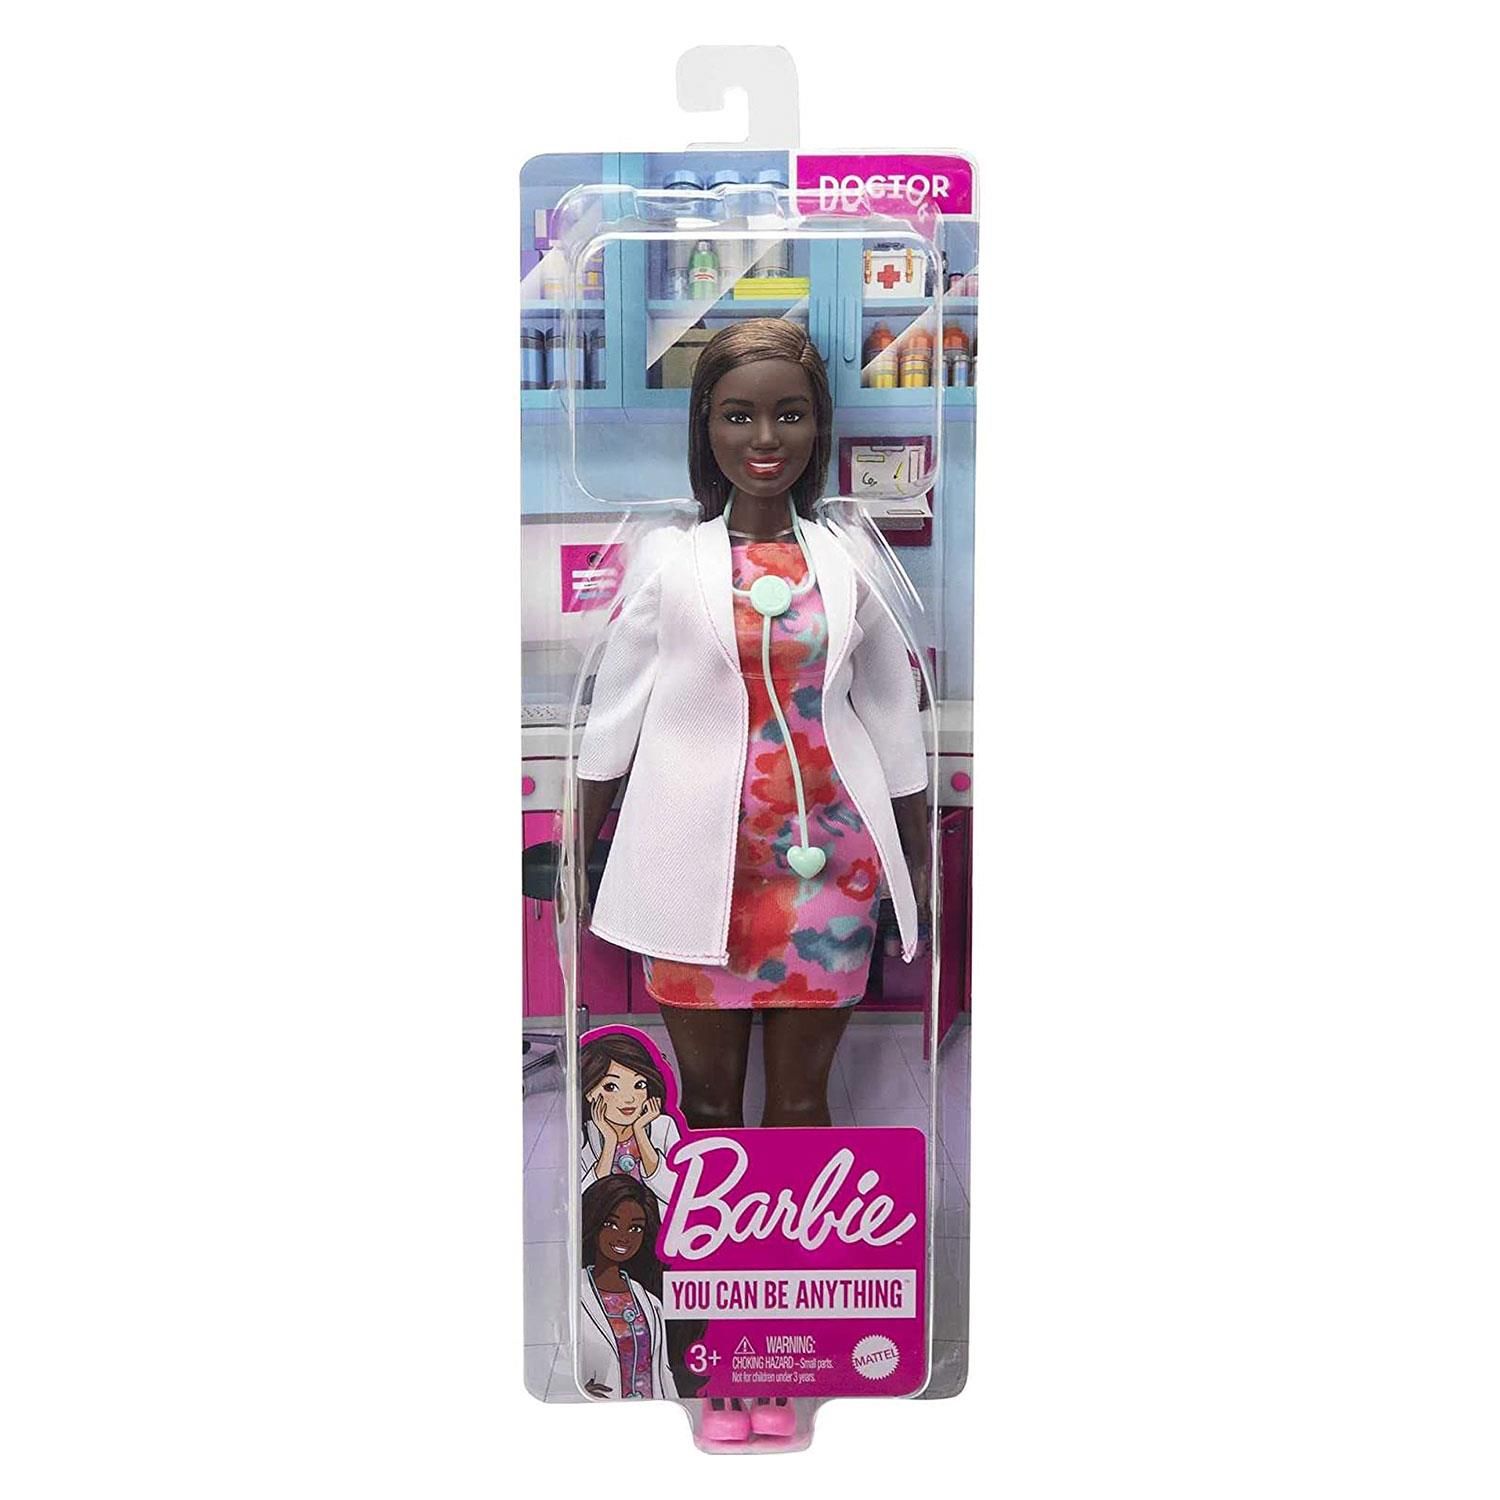 Explore a world of caretaking fun with the Barbie doctor doll! When girls play with Barbie, they imagine everything they can become, and those that love the medical field and take care of others can be a doctor! The Barbie doctor doll wears a colorful print dress with a white doctor's coat and comes with a stethoscope for patient checkups! Kids will love the endless possibilities for creative expression and storytelling fun! Doll cannot stand alone. Colors and decorations may vary. Makes a great gift for ages 3 years old and up.